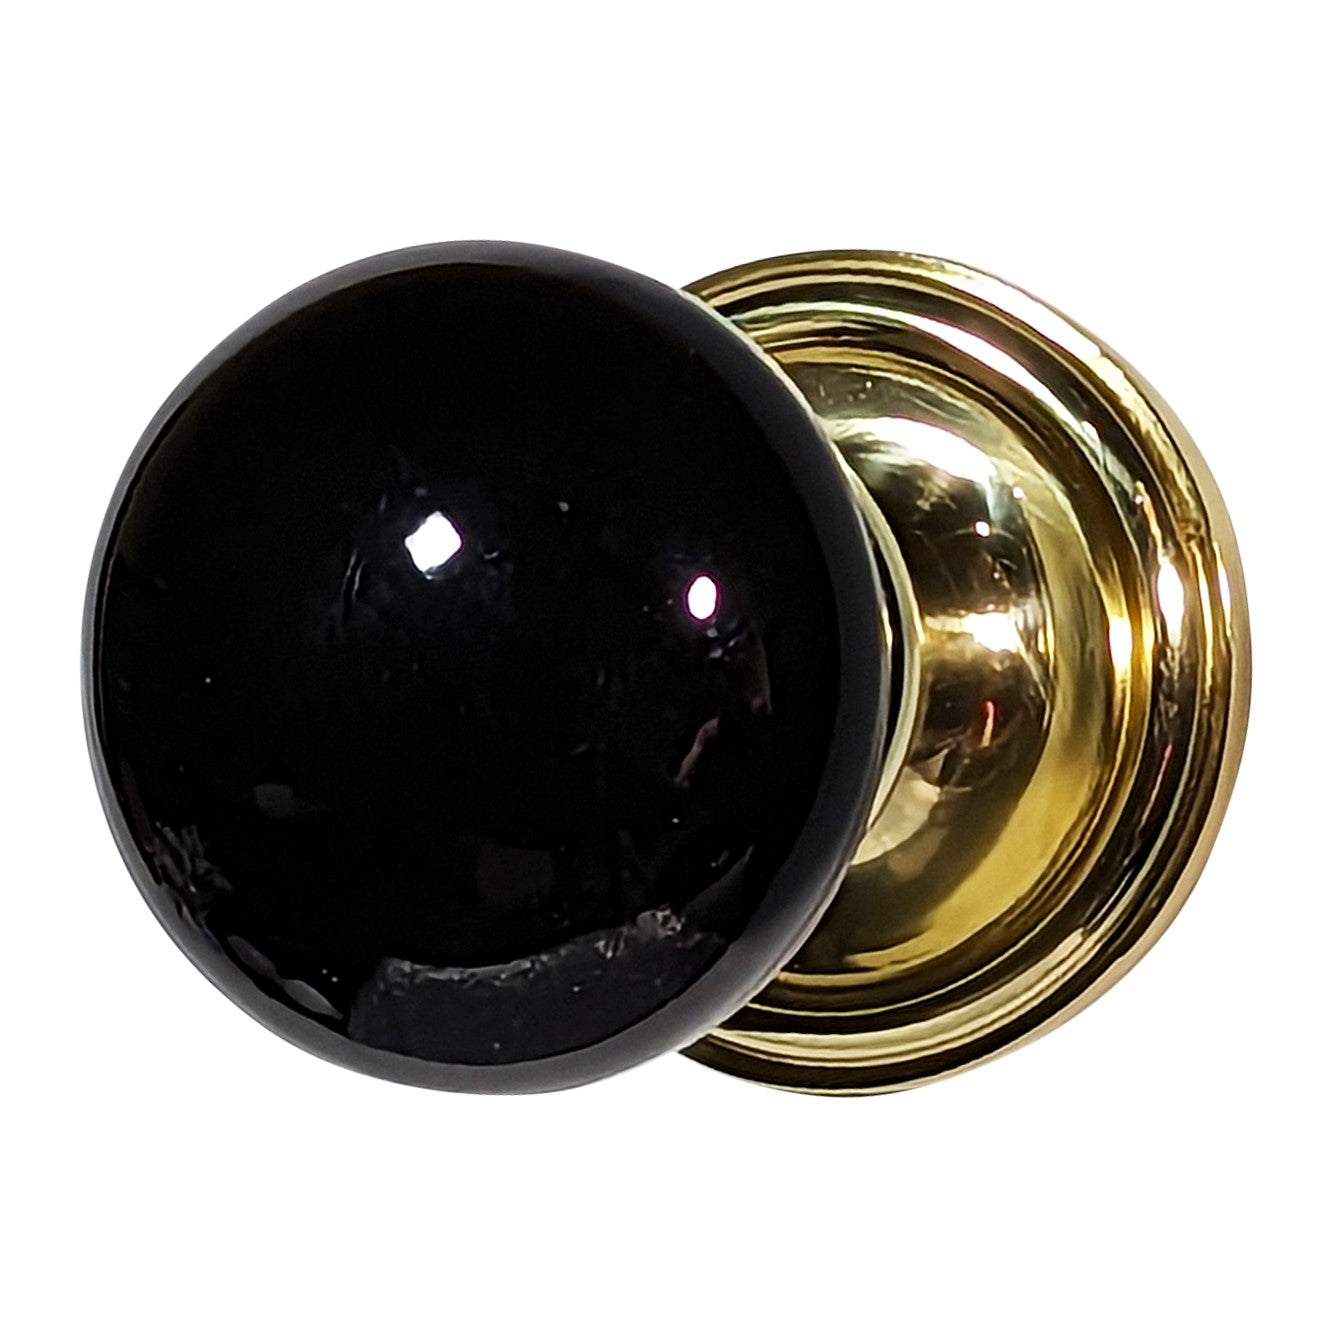 Traditional Rosette Door Set with Black Porcelain Door Knobs (Several Finishes Available)